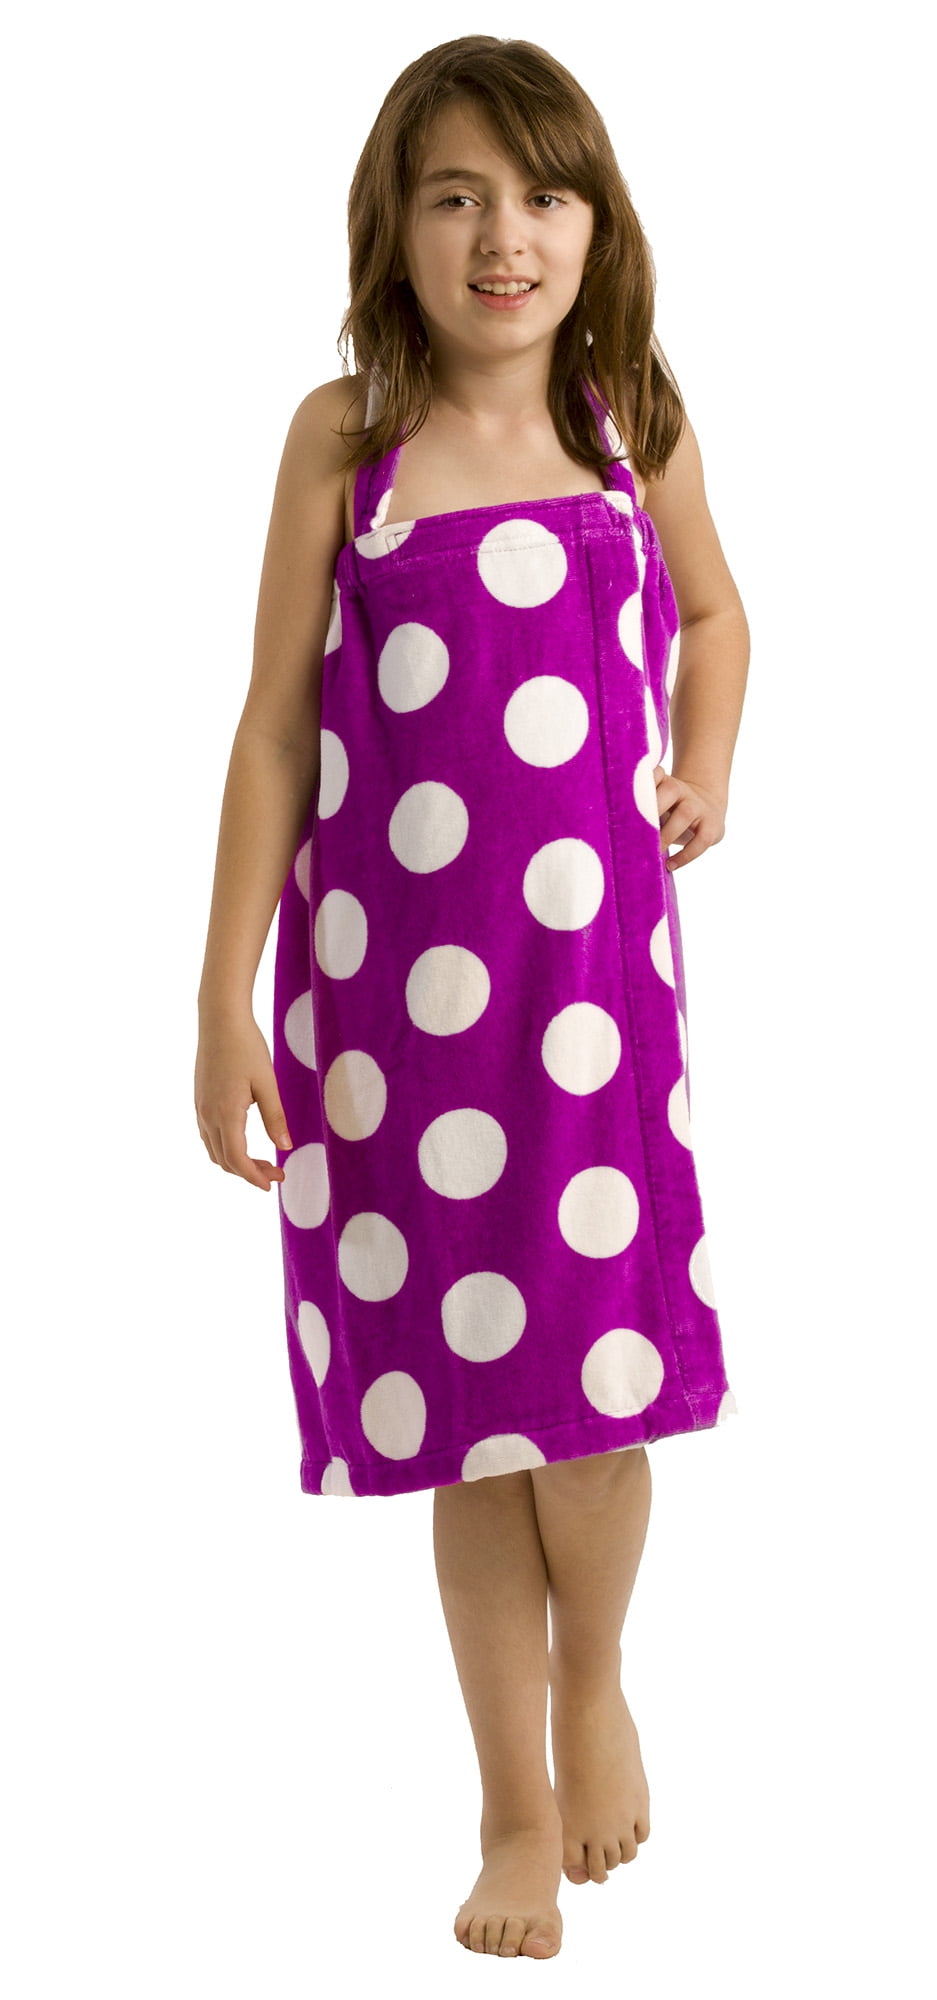 BY LORA Polka Wraps for Girls Bath Wraps Robes Cover up, Light Purple ...